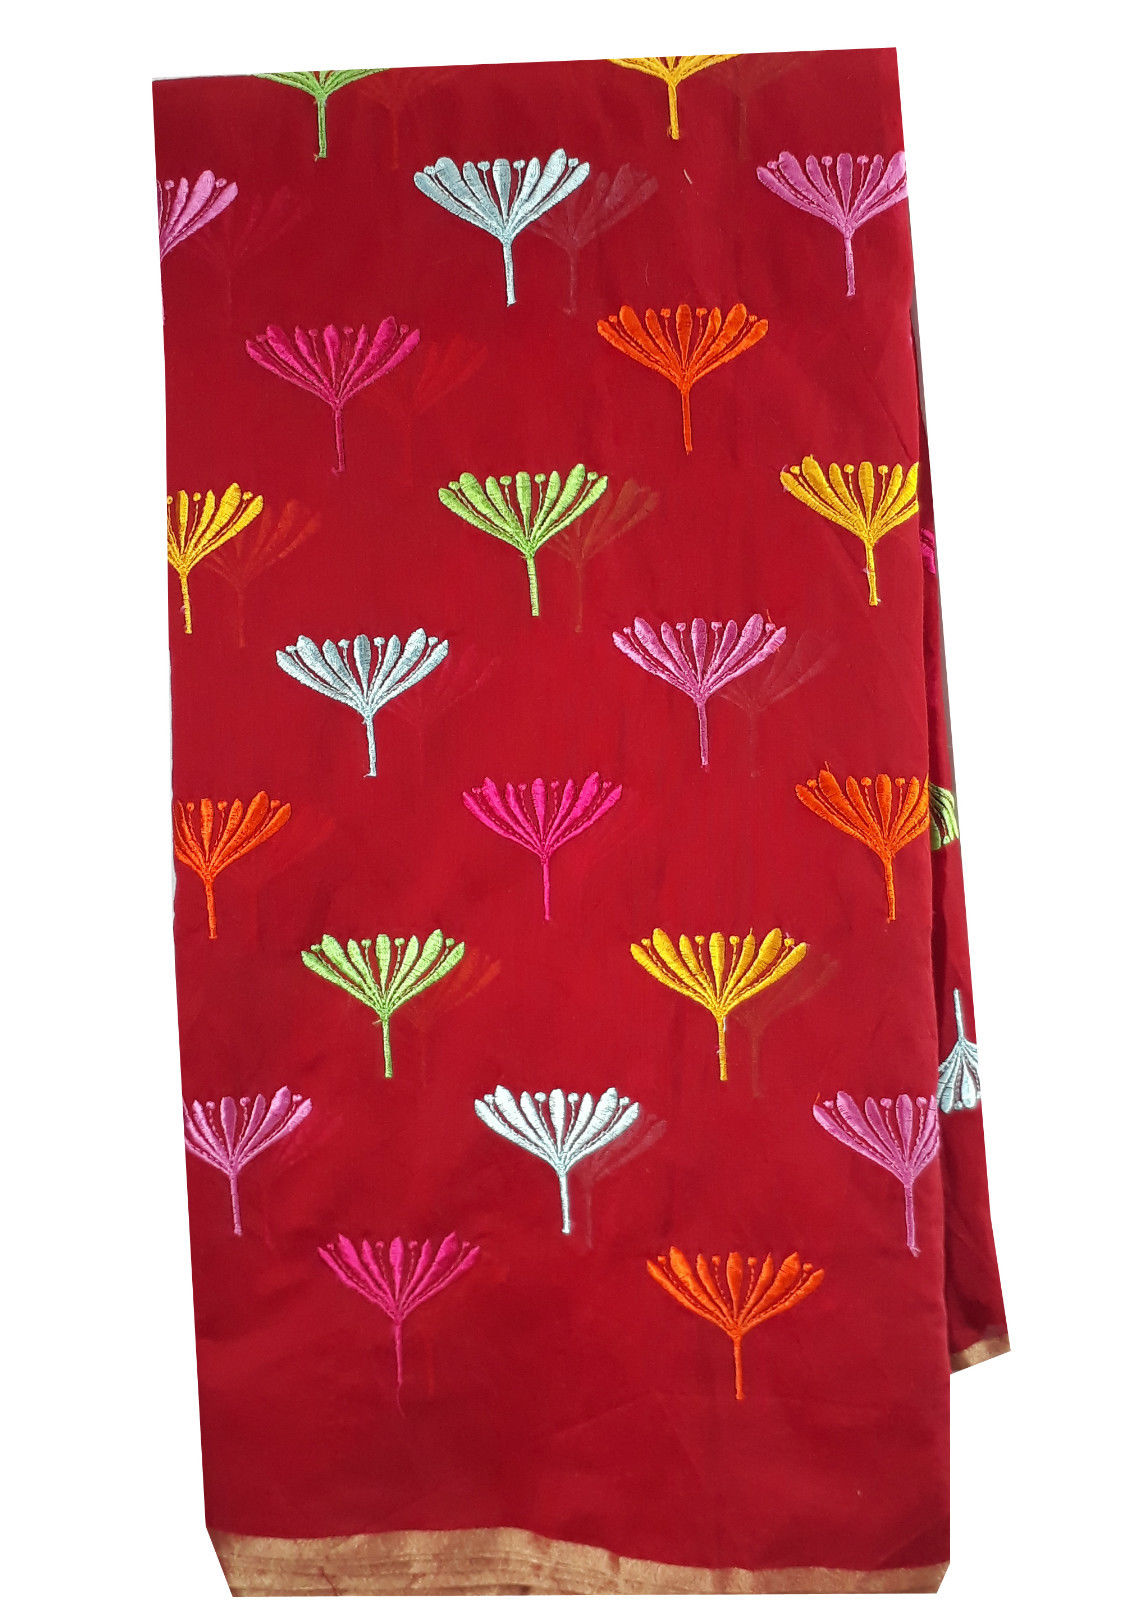 running material online india fabric embroidery designs Chanderi Cotton Red 43 inches Wide _Red